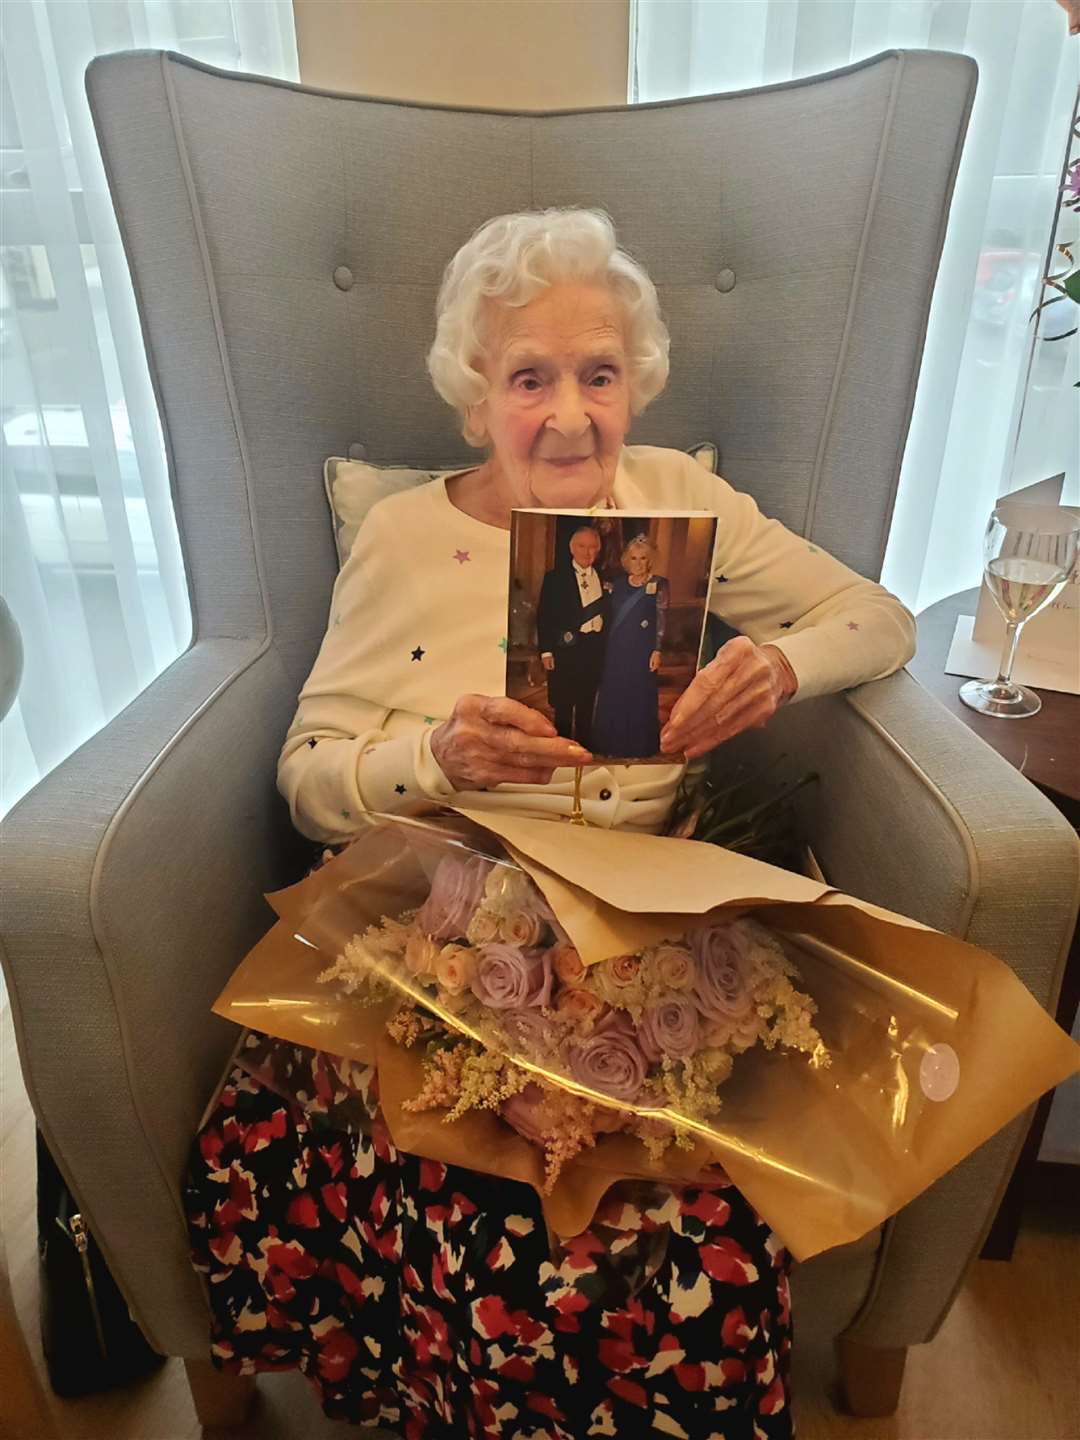 The great-great-grandmother also received a special birthday message from the King (Care UK)